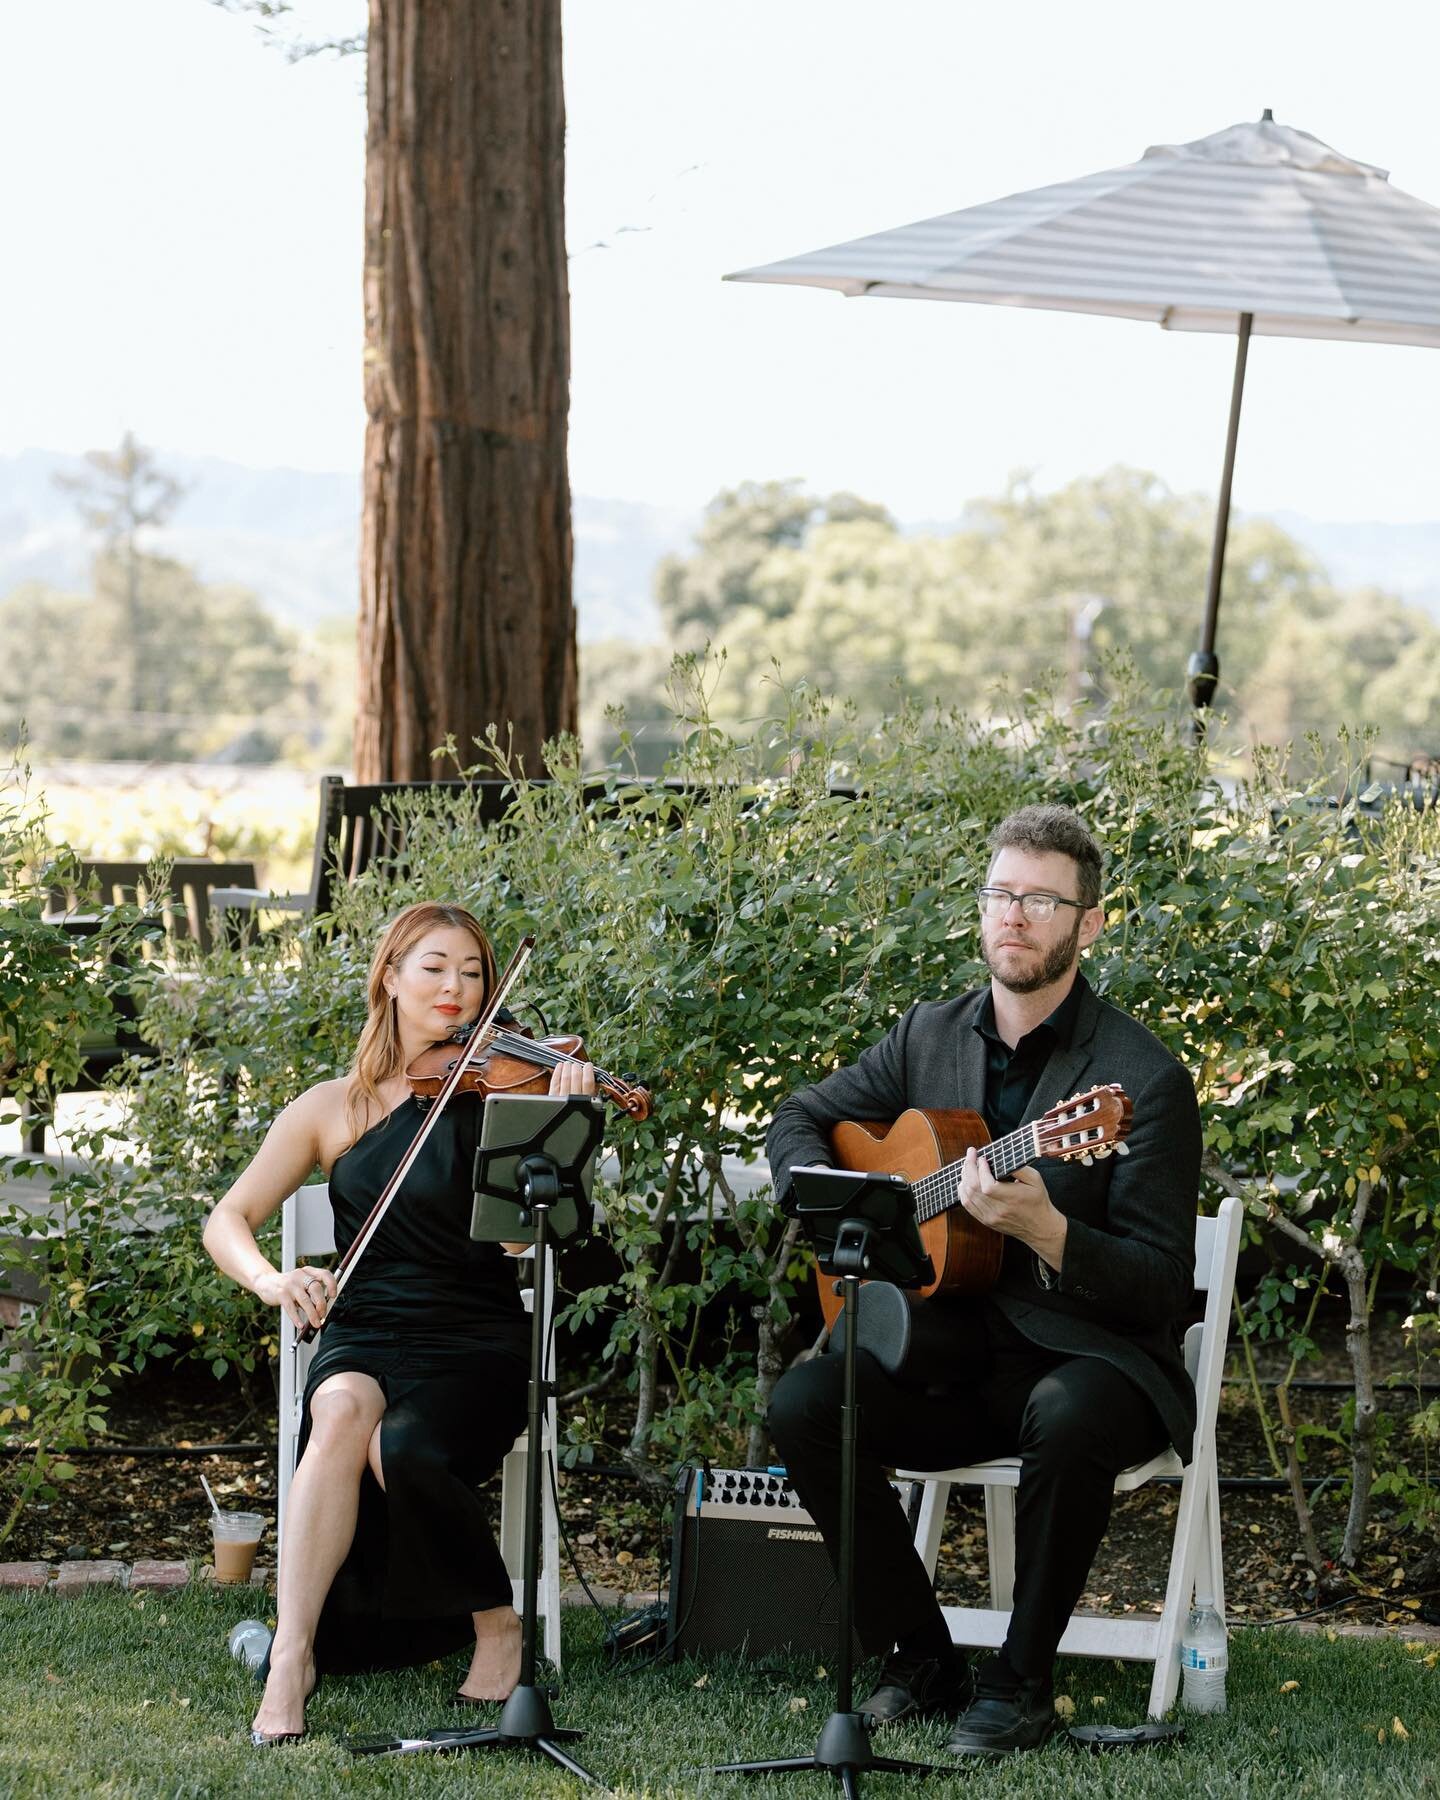 It has been a wonderful year of music making. We are so thankful to work with the most fantastic clients and team of vendors! ❤️
.
.
.
#bellarosasq #violin #guitar #duo #musicians #napavalley #winecountry #winecountrywedding #ceremony #ceremonymusici